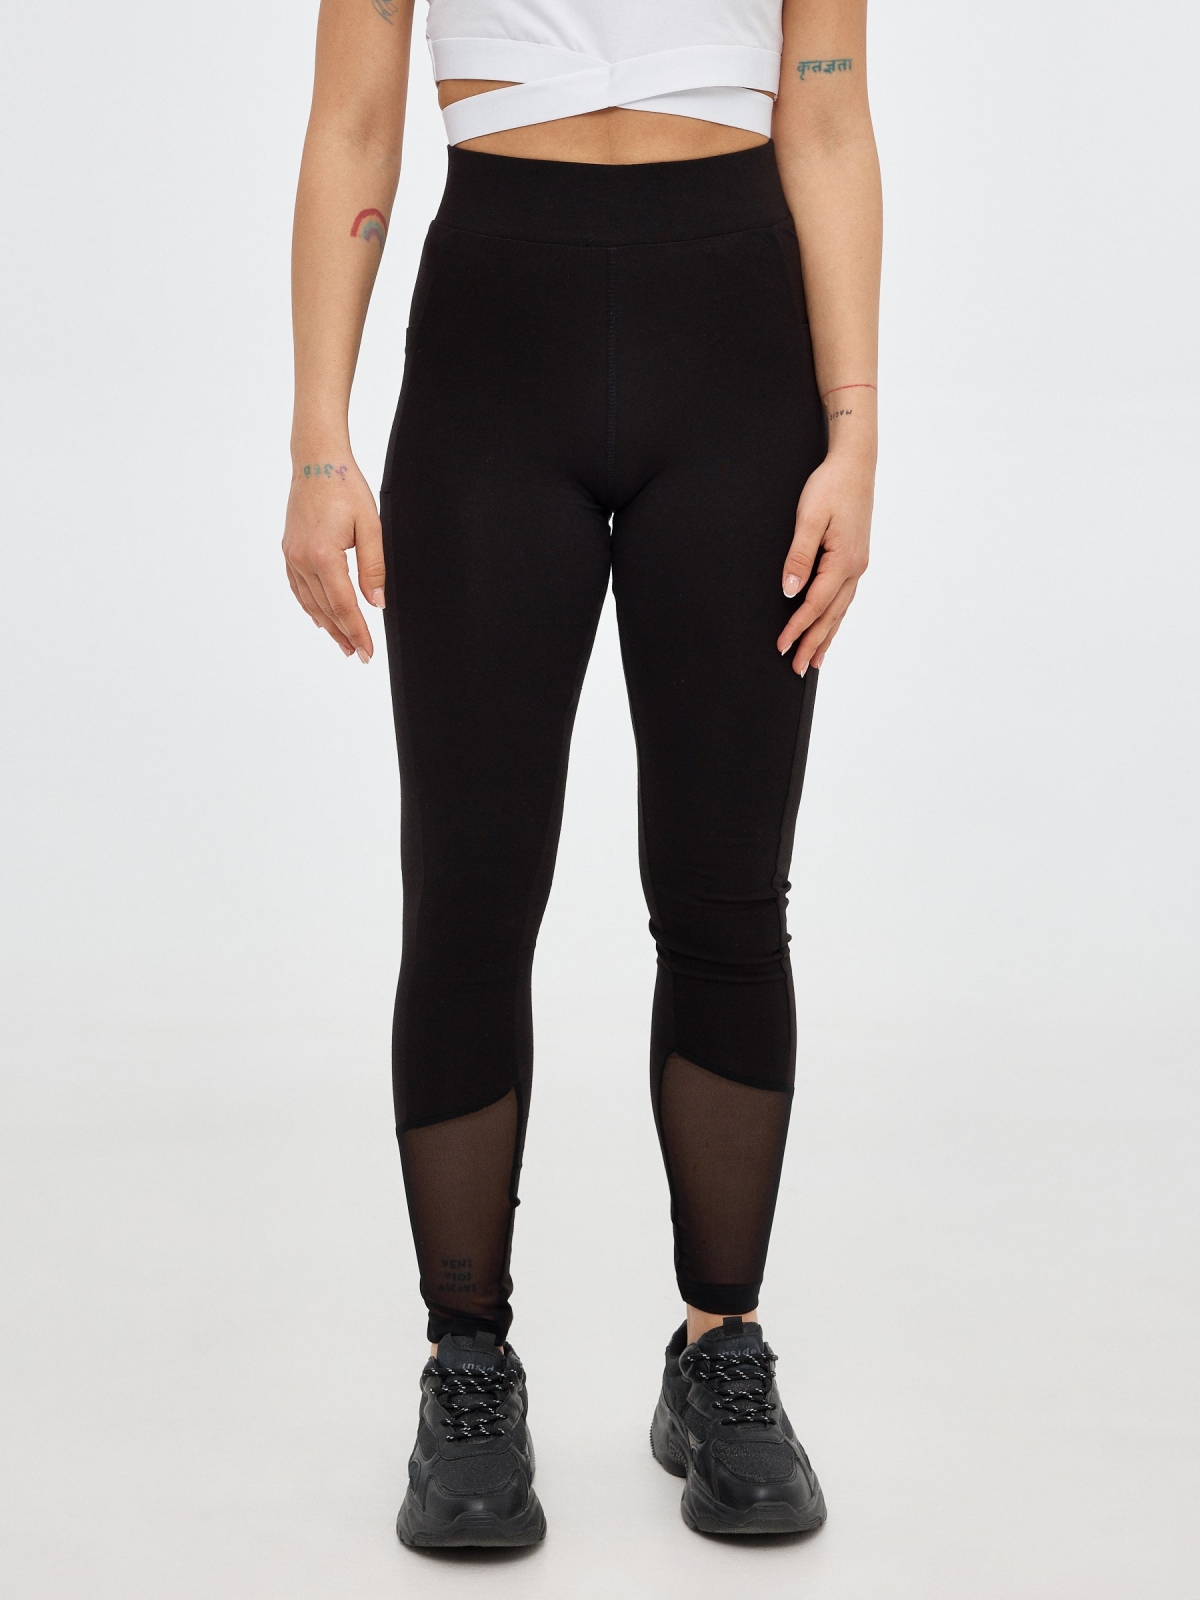 Legging with mesh details black middle front view